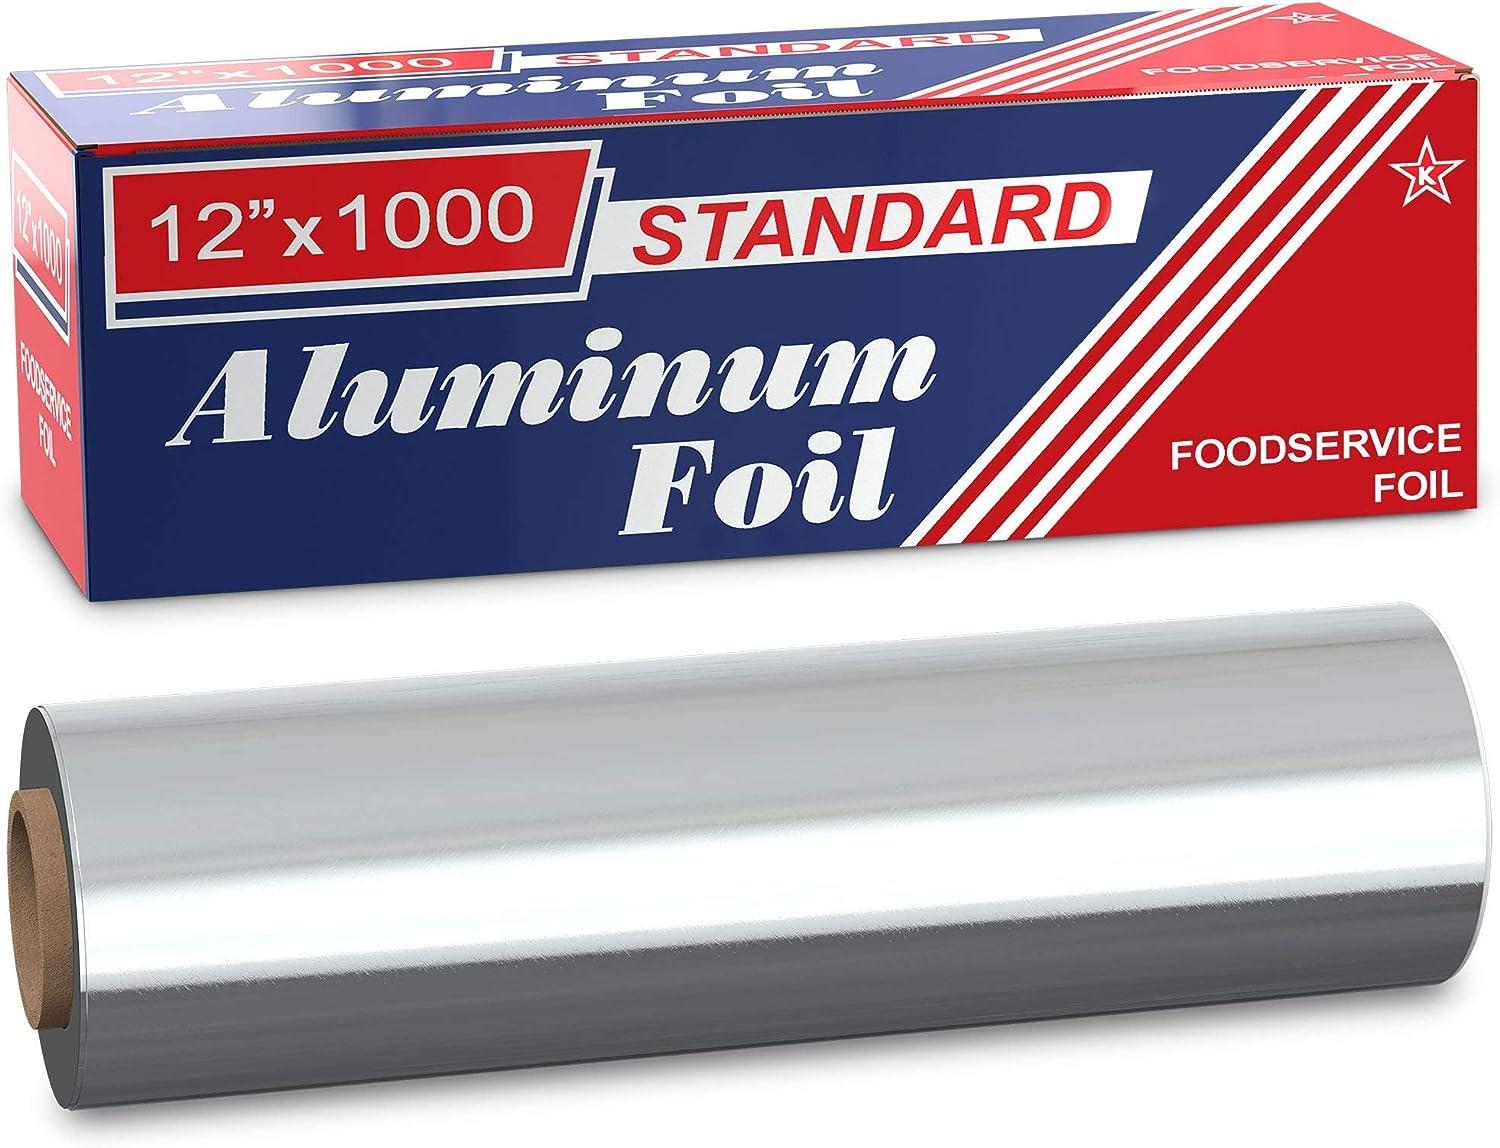  Ox Plastics Aluminum Foil Wrap for Food, Heavy Duty Aluminum  Foil, BBQ Silver Foil Rolls for Grilling, Roasting, Baking, Perfect for  Commercial & Home Use